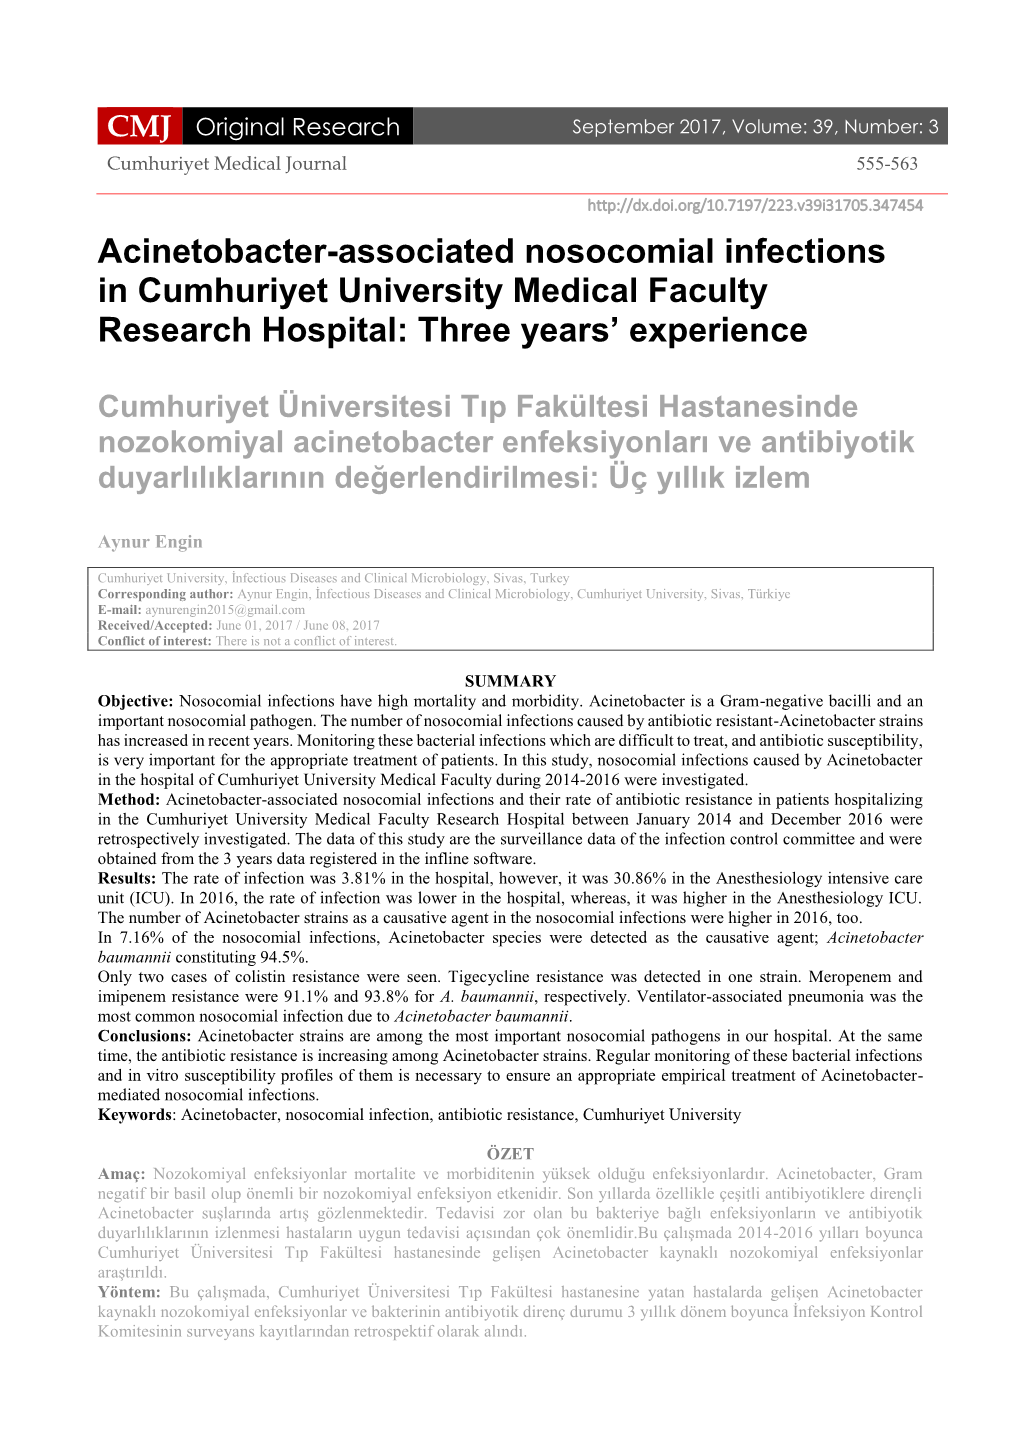 Acinetobacter-Associated Nosocomial Infections in Cumhuriyet University Medical Faculty Research Hospital: Three Years’ Experience